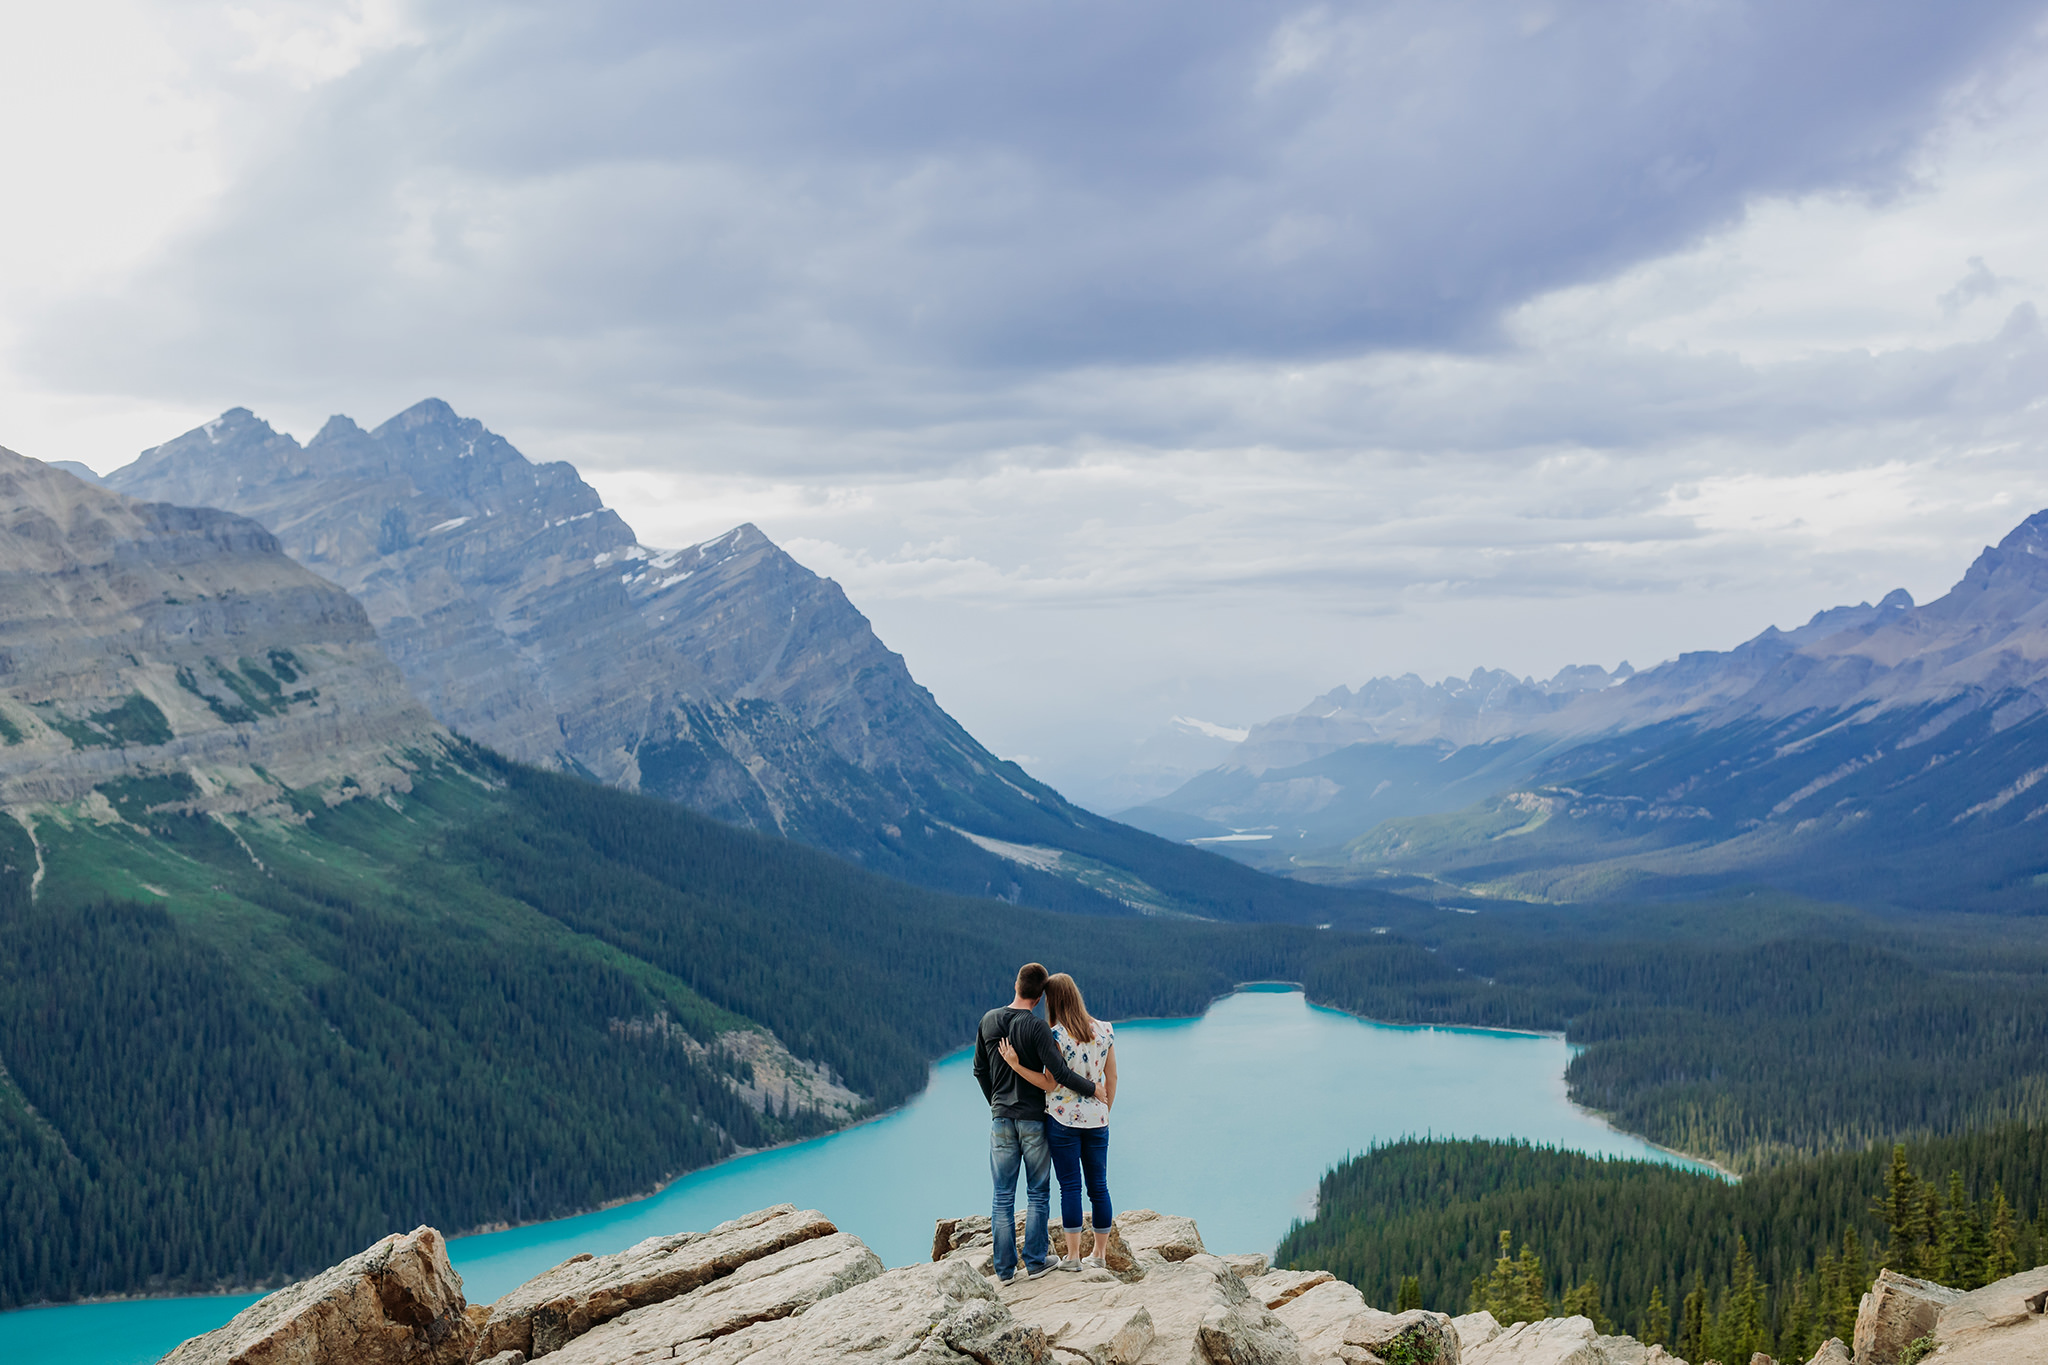 Peyto Lake casual engagement photography session at Bow Summit along Icefields Parkway in Banff National Park photographed by local engagement & elopement photographer ENV Photography